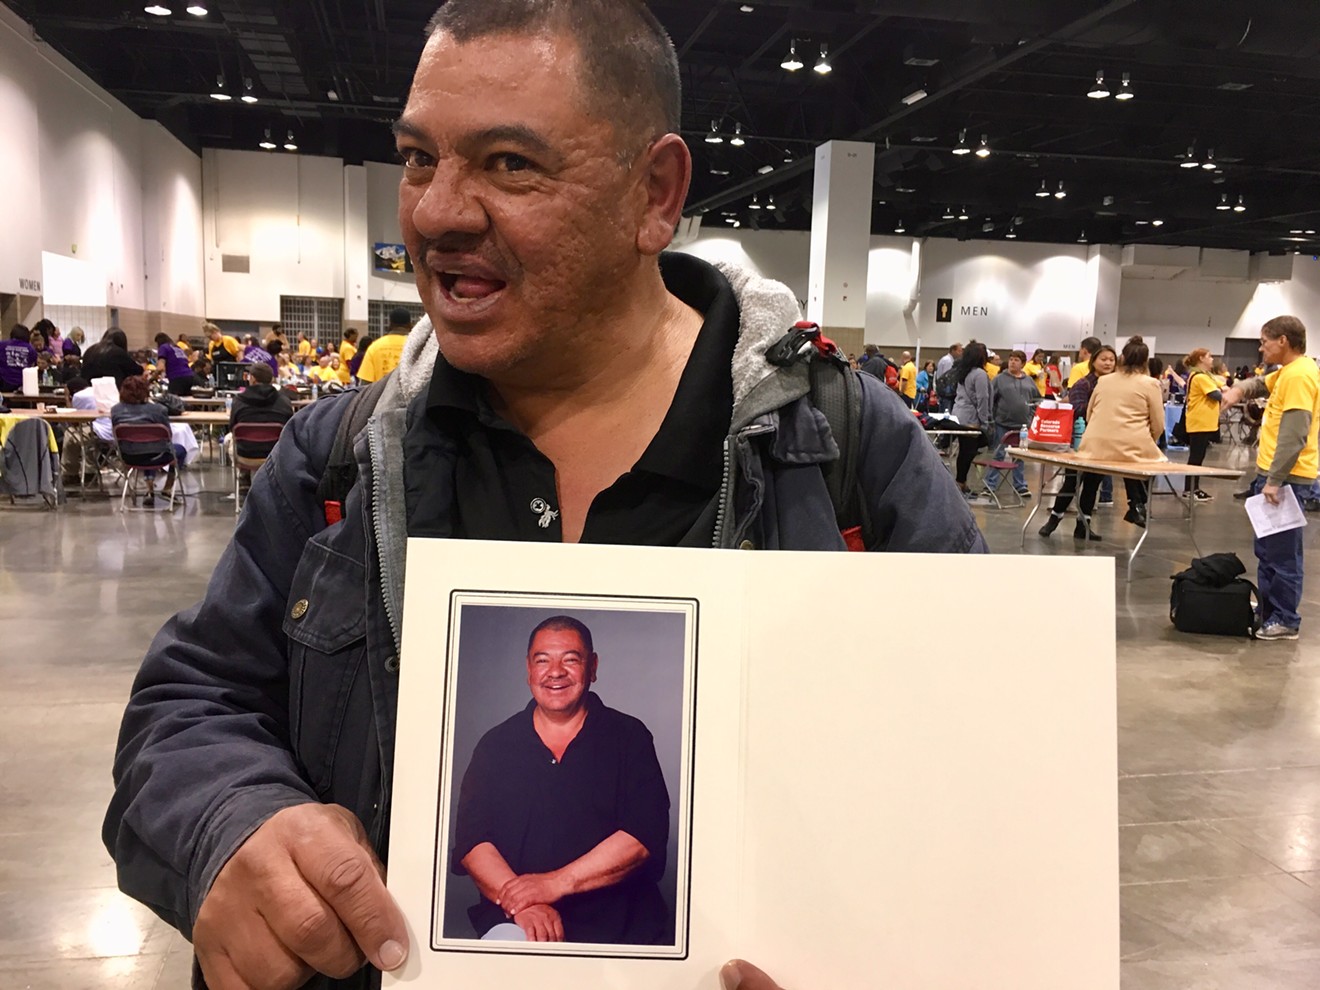 Gary Pacheco shows off a portrait that was taken of him at Project Homeless Connect on November 15.